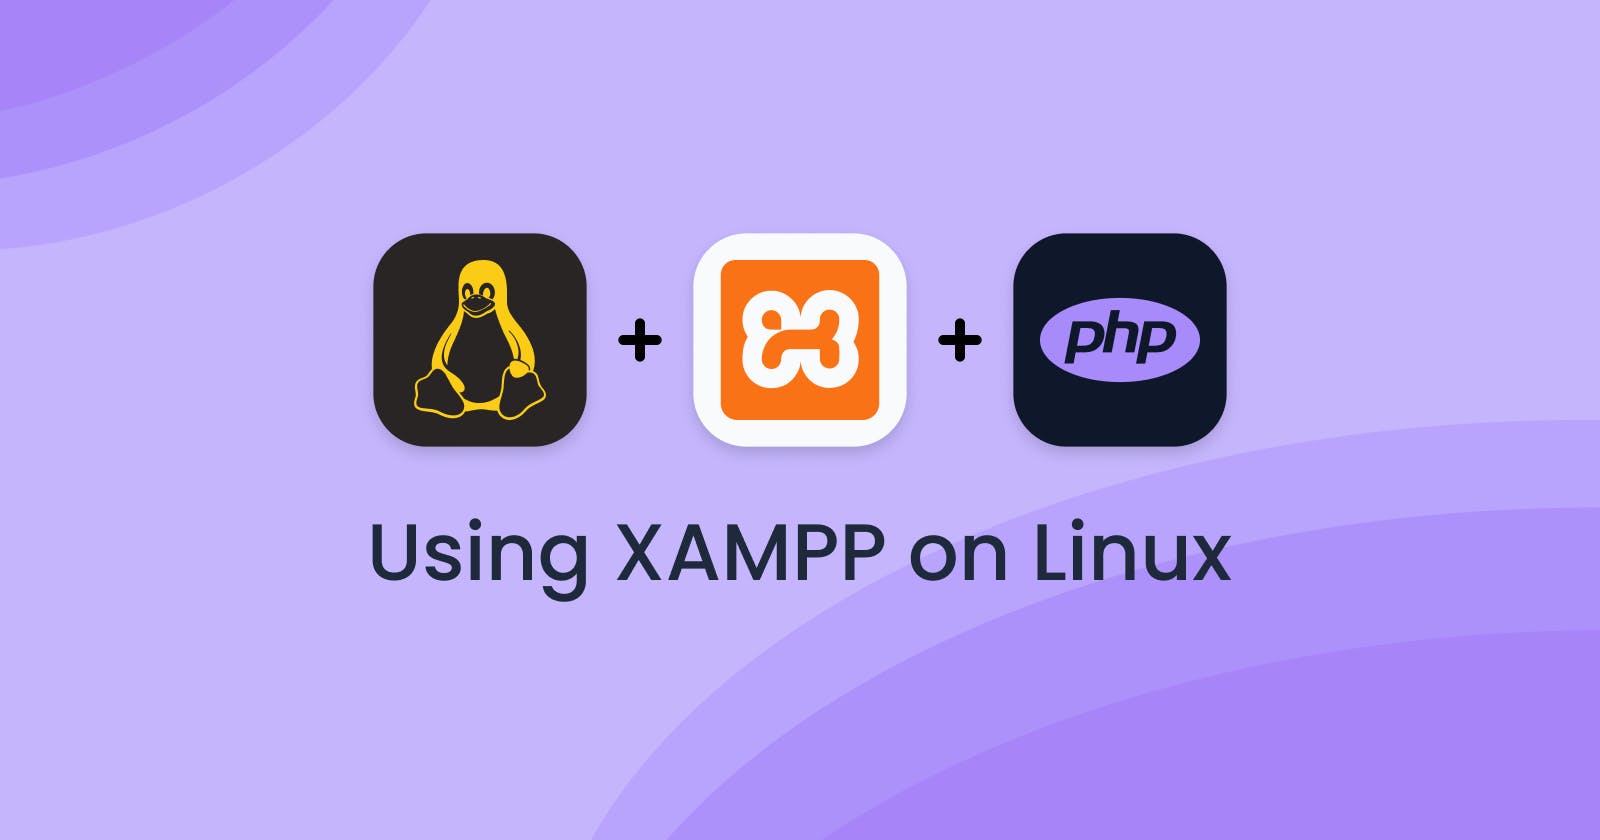 First impressions of using XAMPP on Linux for PHP development